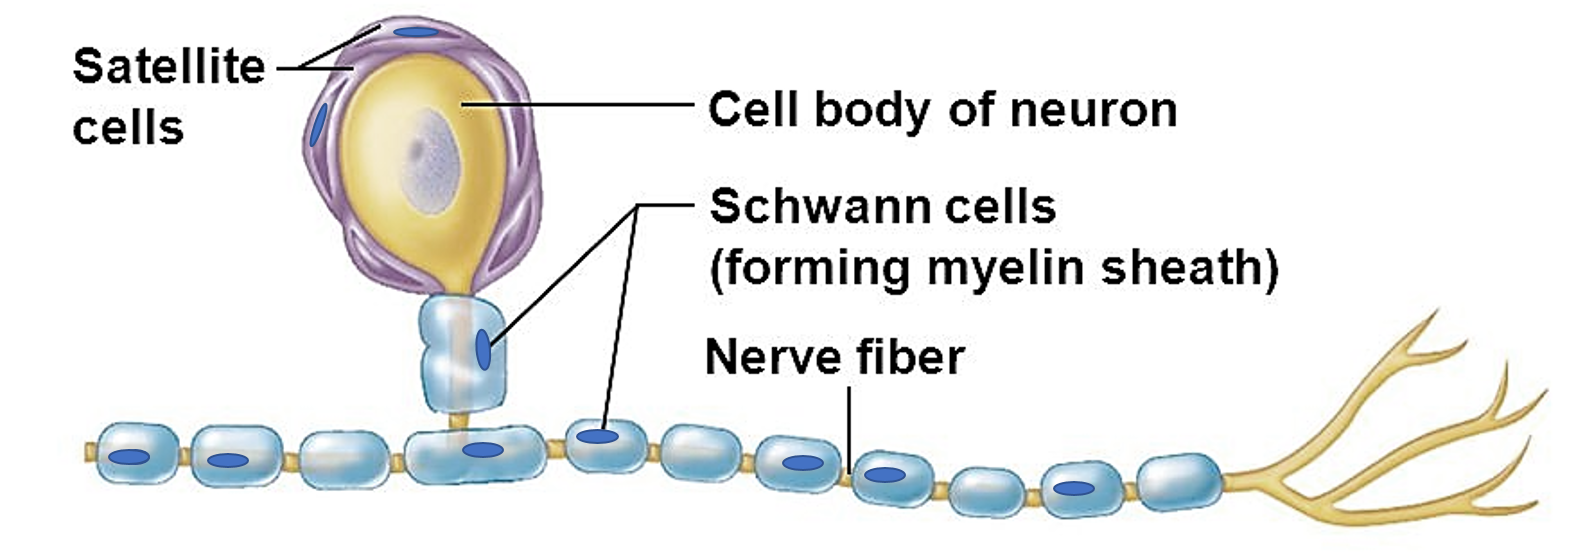 schwann cell and satellite cell